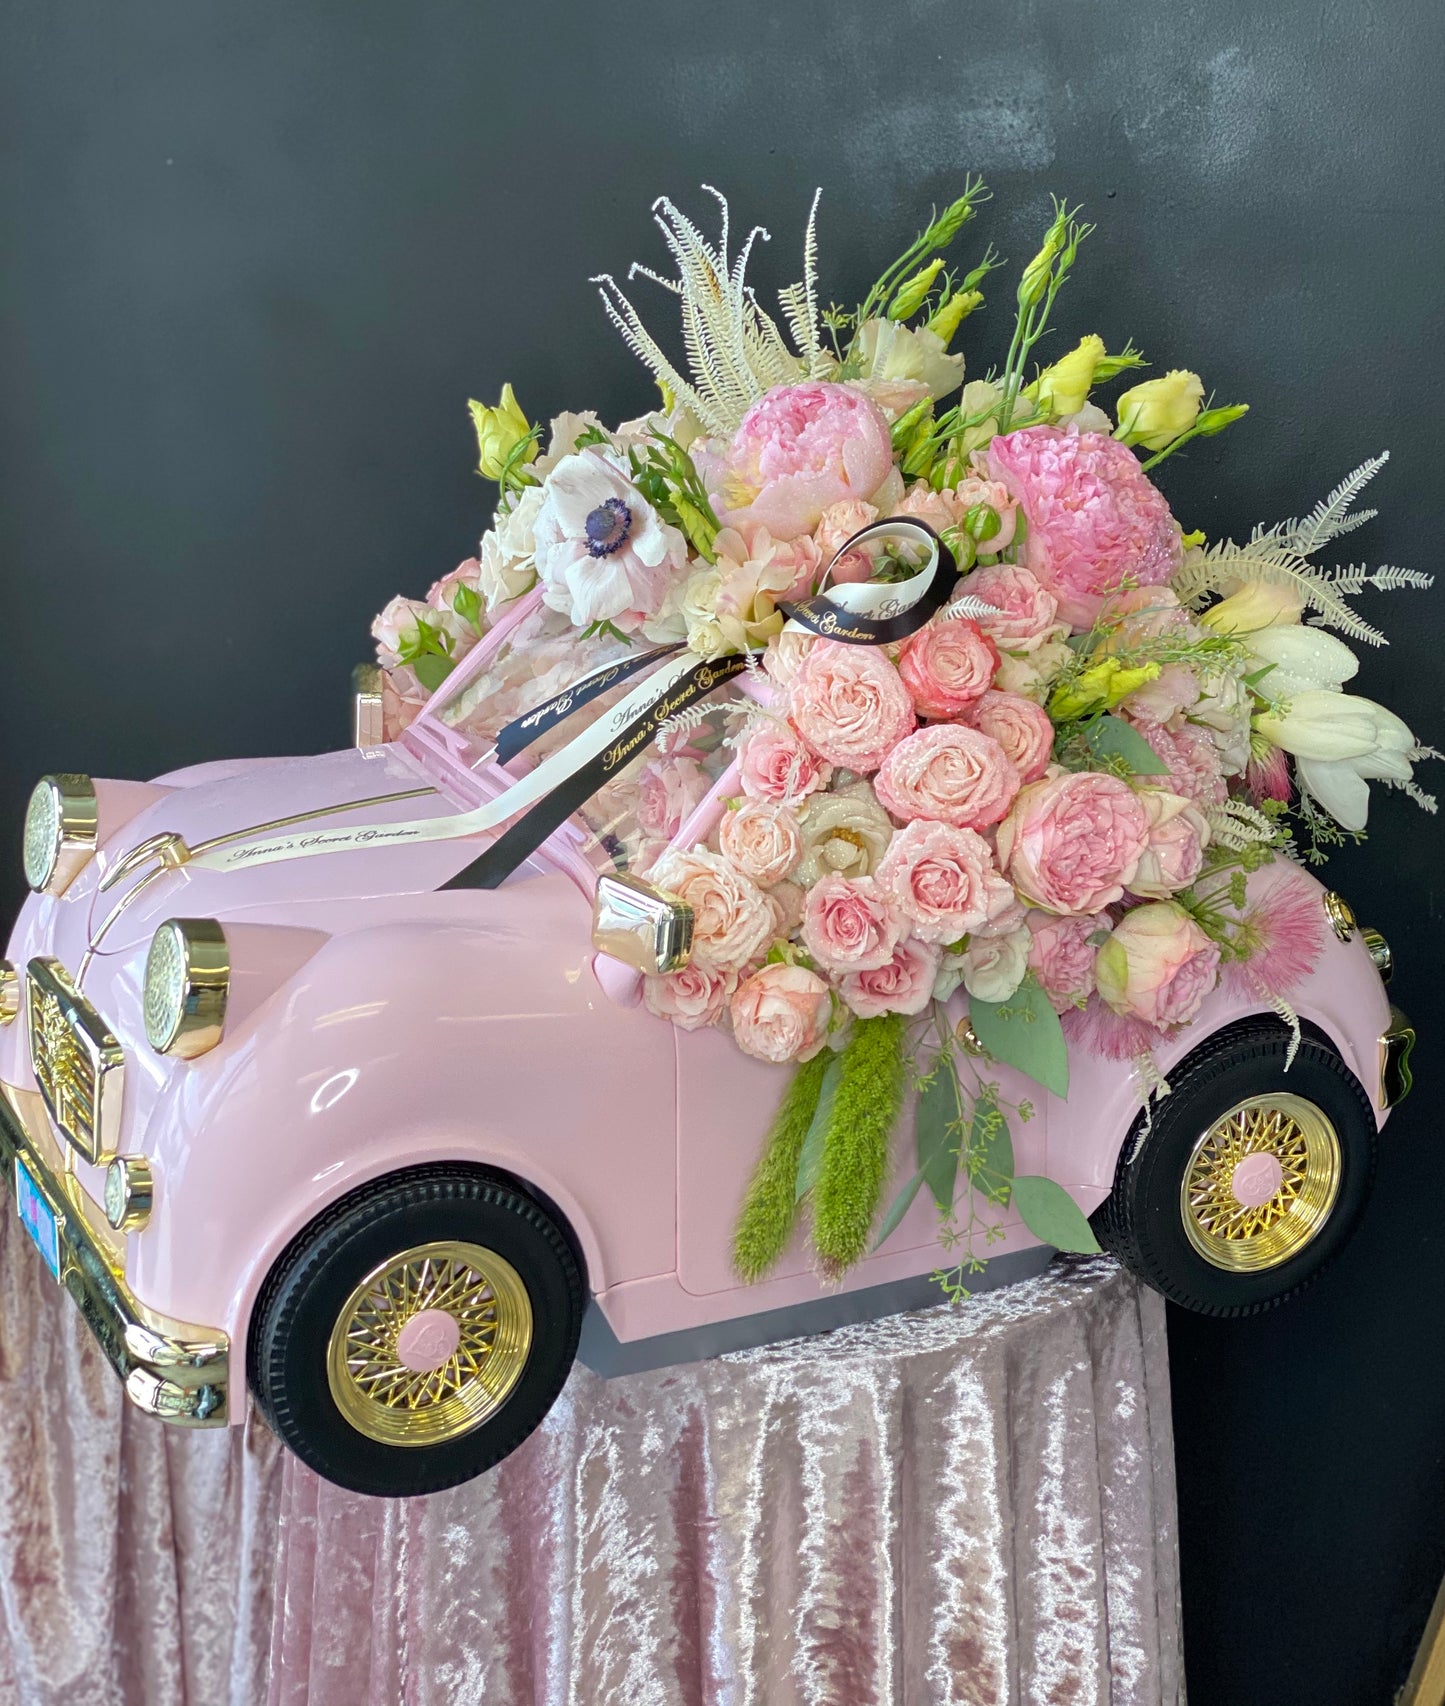 A Pink Car Full of Flowers